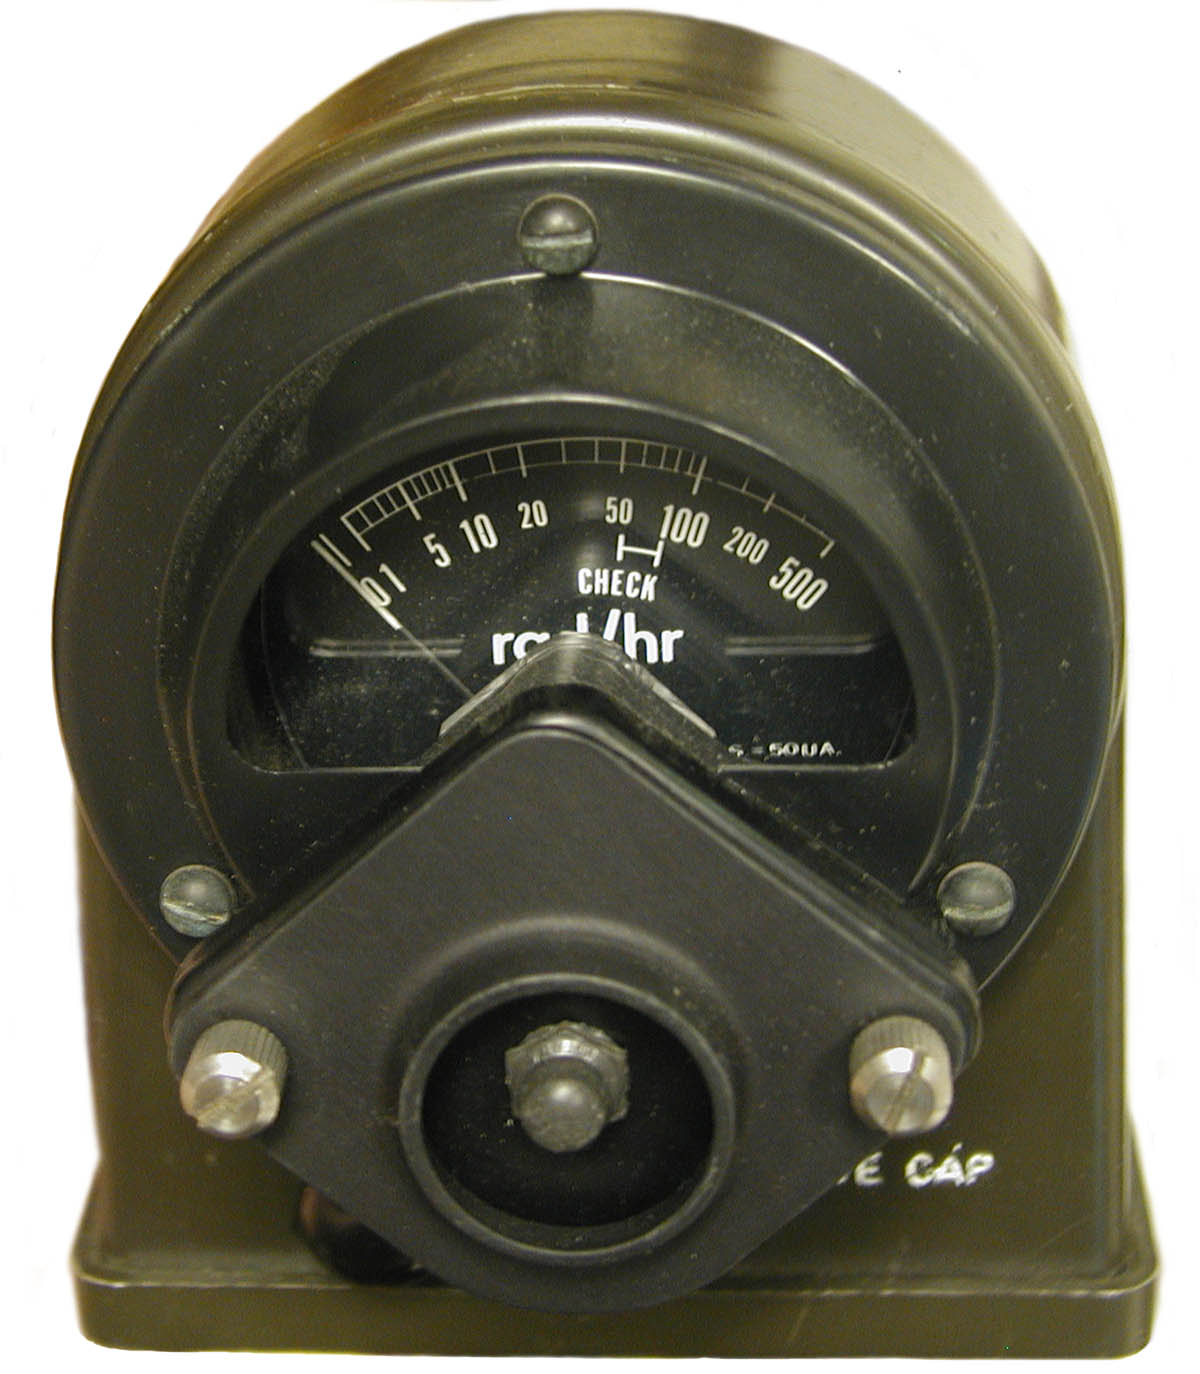 IM-174/PD Ion Chamber Survey Meters